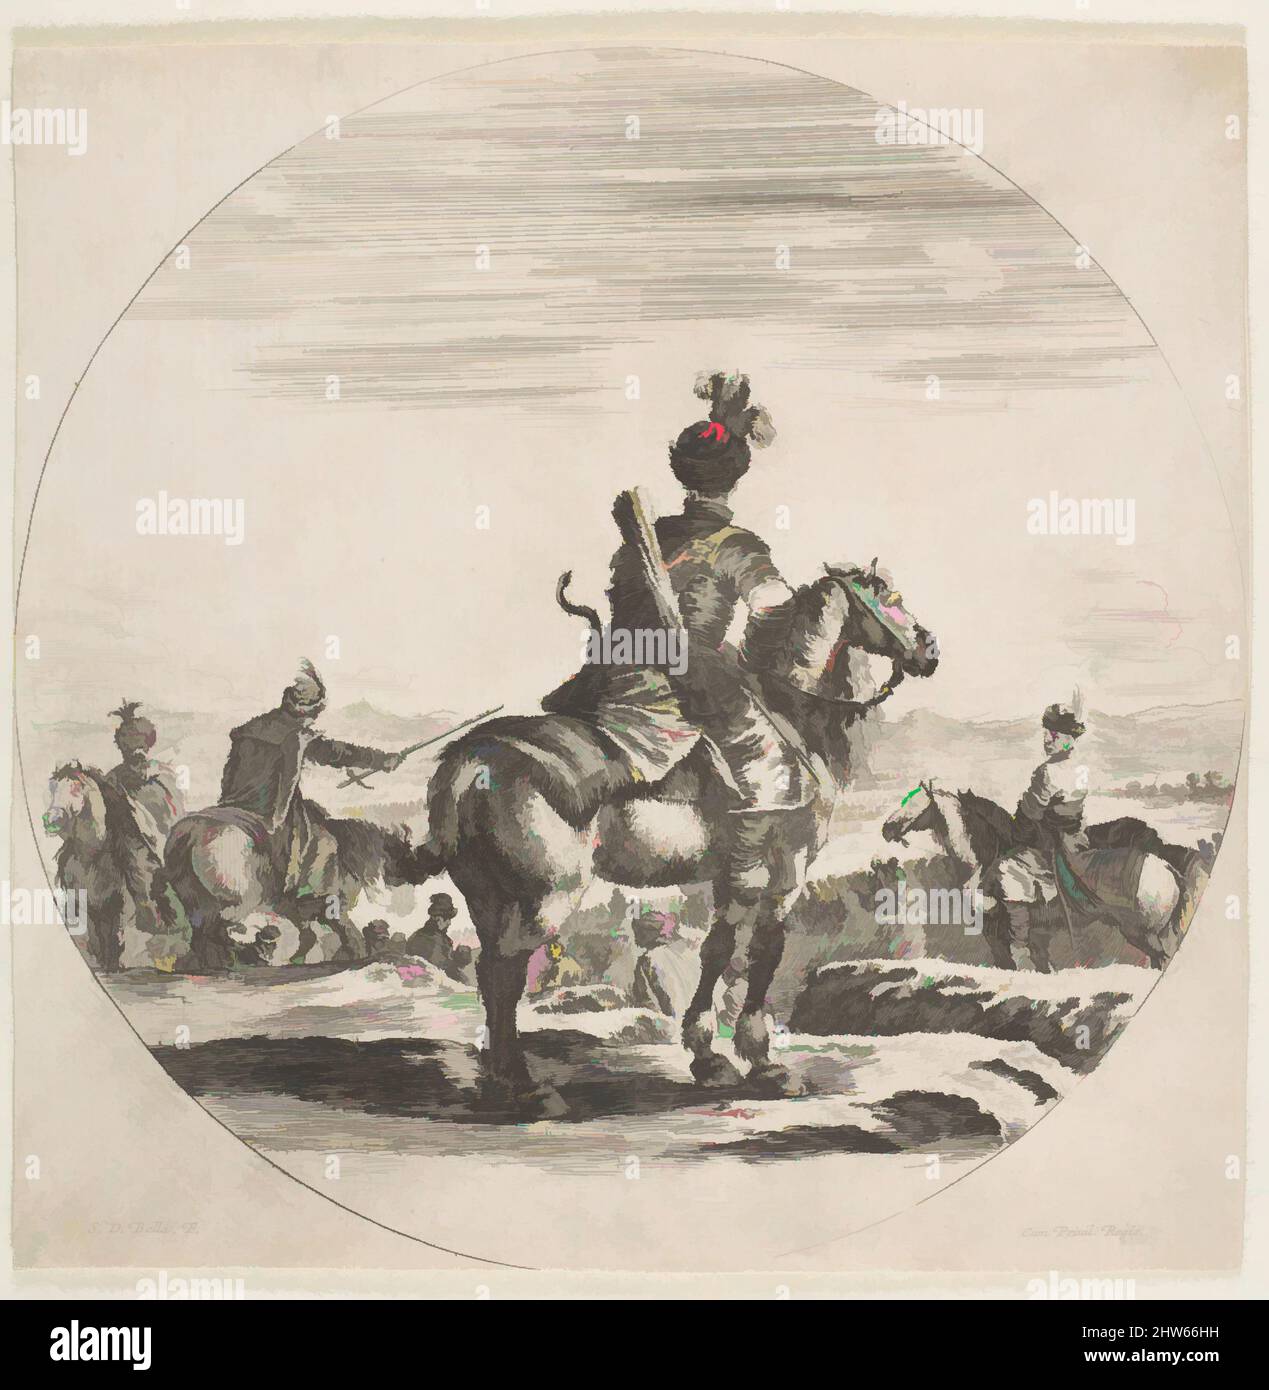 Art inspired by Polish horseman with a bow and arrow, seen from behind with his horse facing right, a circular composition, from 'Figures on Horseback' (Cavaliers nègres, polonais et hongrois), ca. 1651, Etching, Sheet: 7 5/16 × 7 5/16 in. (18.5 × 18.5 cm), Prints, Stefano della Bella, Classic works modernized by Artotop with a splash of modernity. Shapes, color and value, eye-catching visual impact on art. Emotions through freedom of artworks in a contemporary way. A timeless message pursuing a wildly creative new direction. Artists turning to the digital medium and creating the Artotop NFT Stock Photo